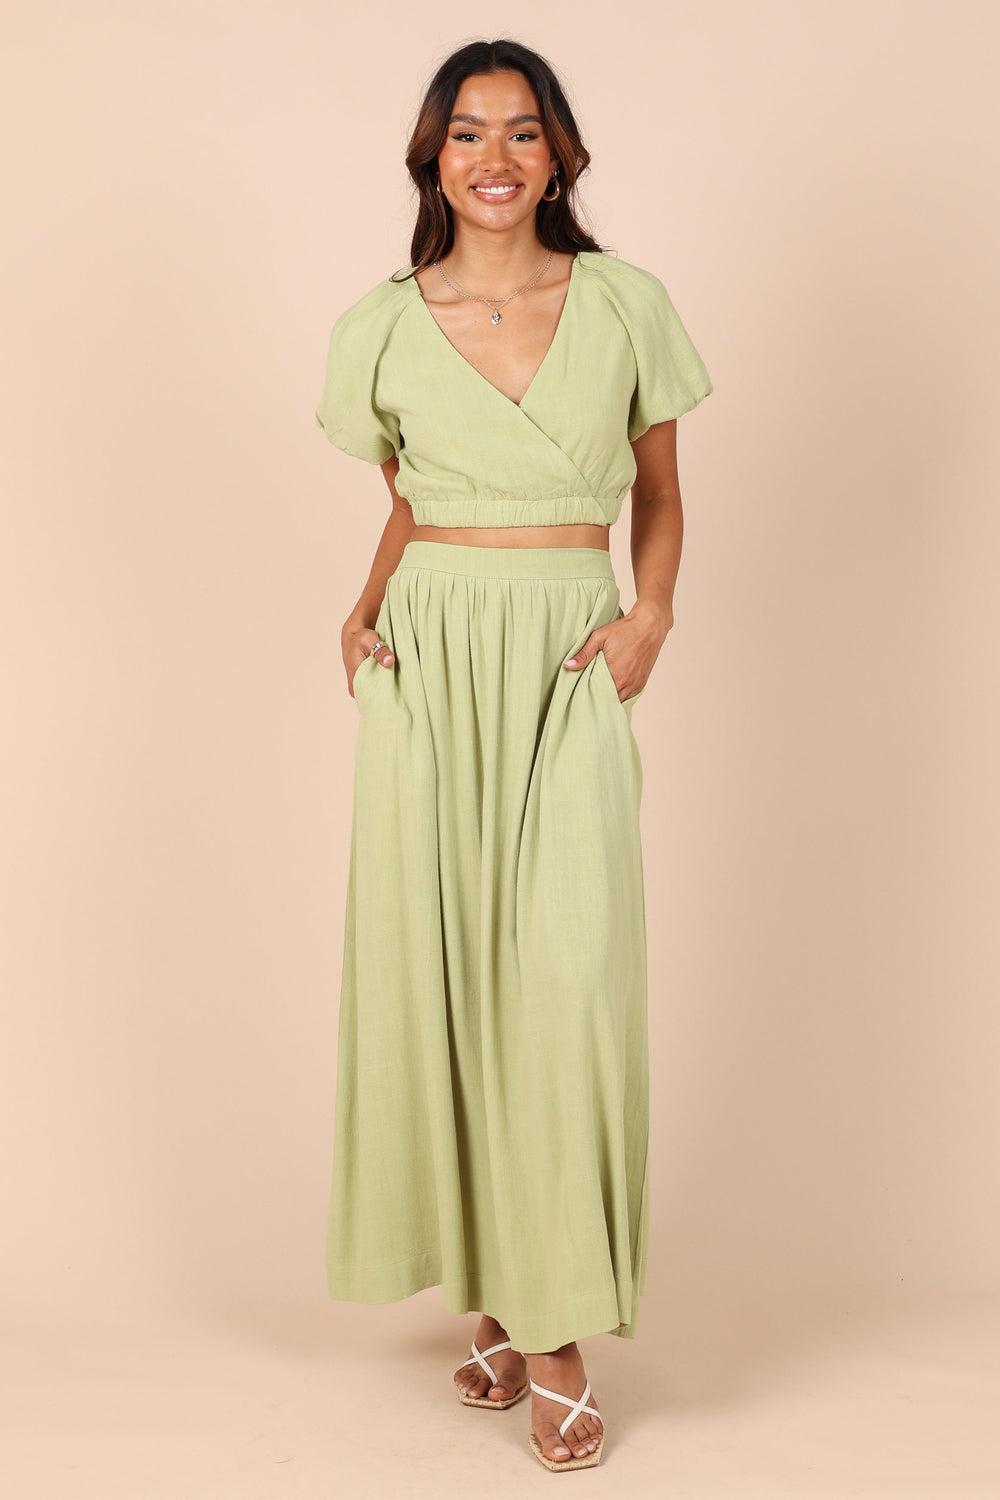 Maude Floral Lace Maxi Skirt in Sage Green  Altard State